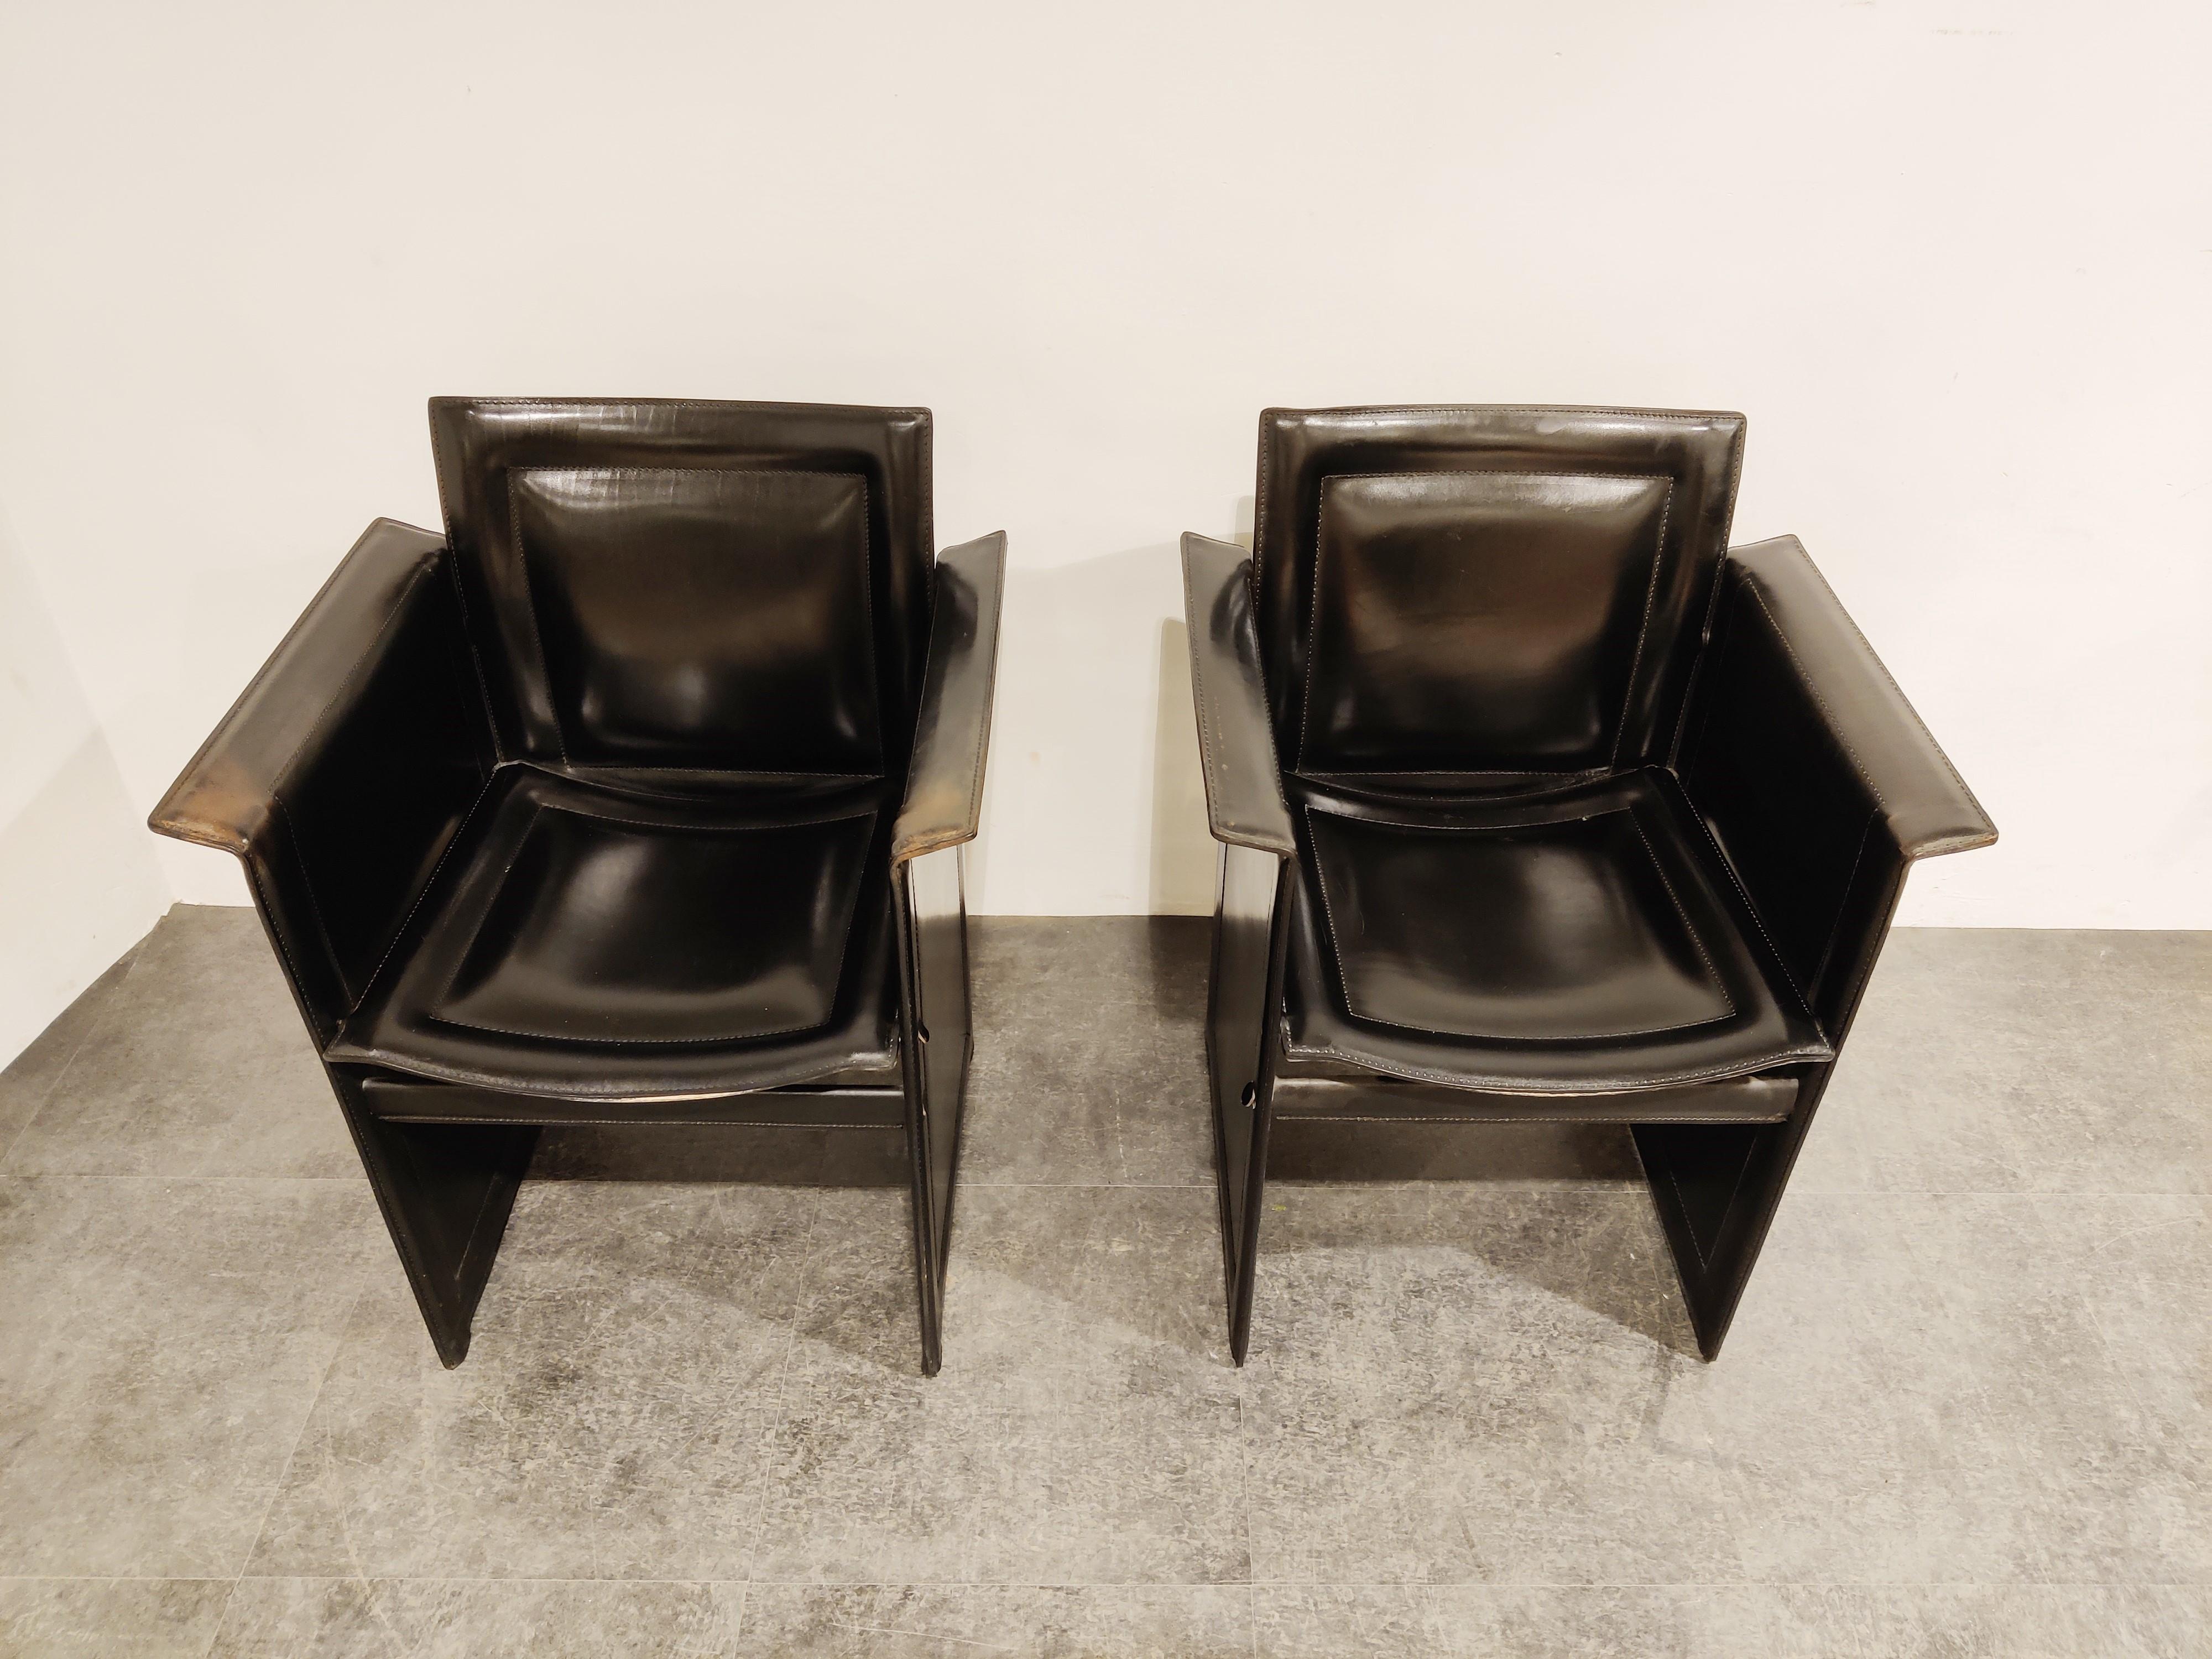 Pair of leather side or dining chairs designed by Tito Agnoli for Matteo Grassi. - Model Korium

Nicely manufactured pair of chairs completely upholstered with black leather. 

These are great as a pair to fill an empty space in a living room or